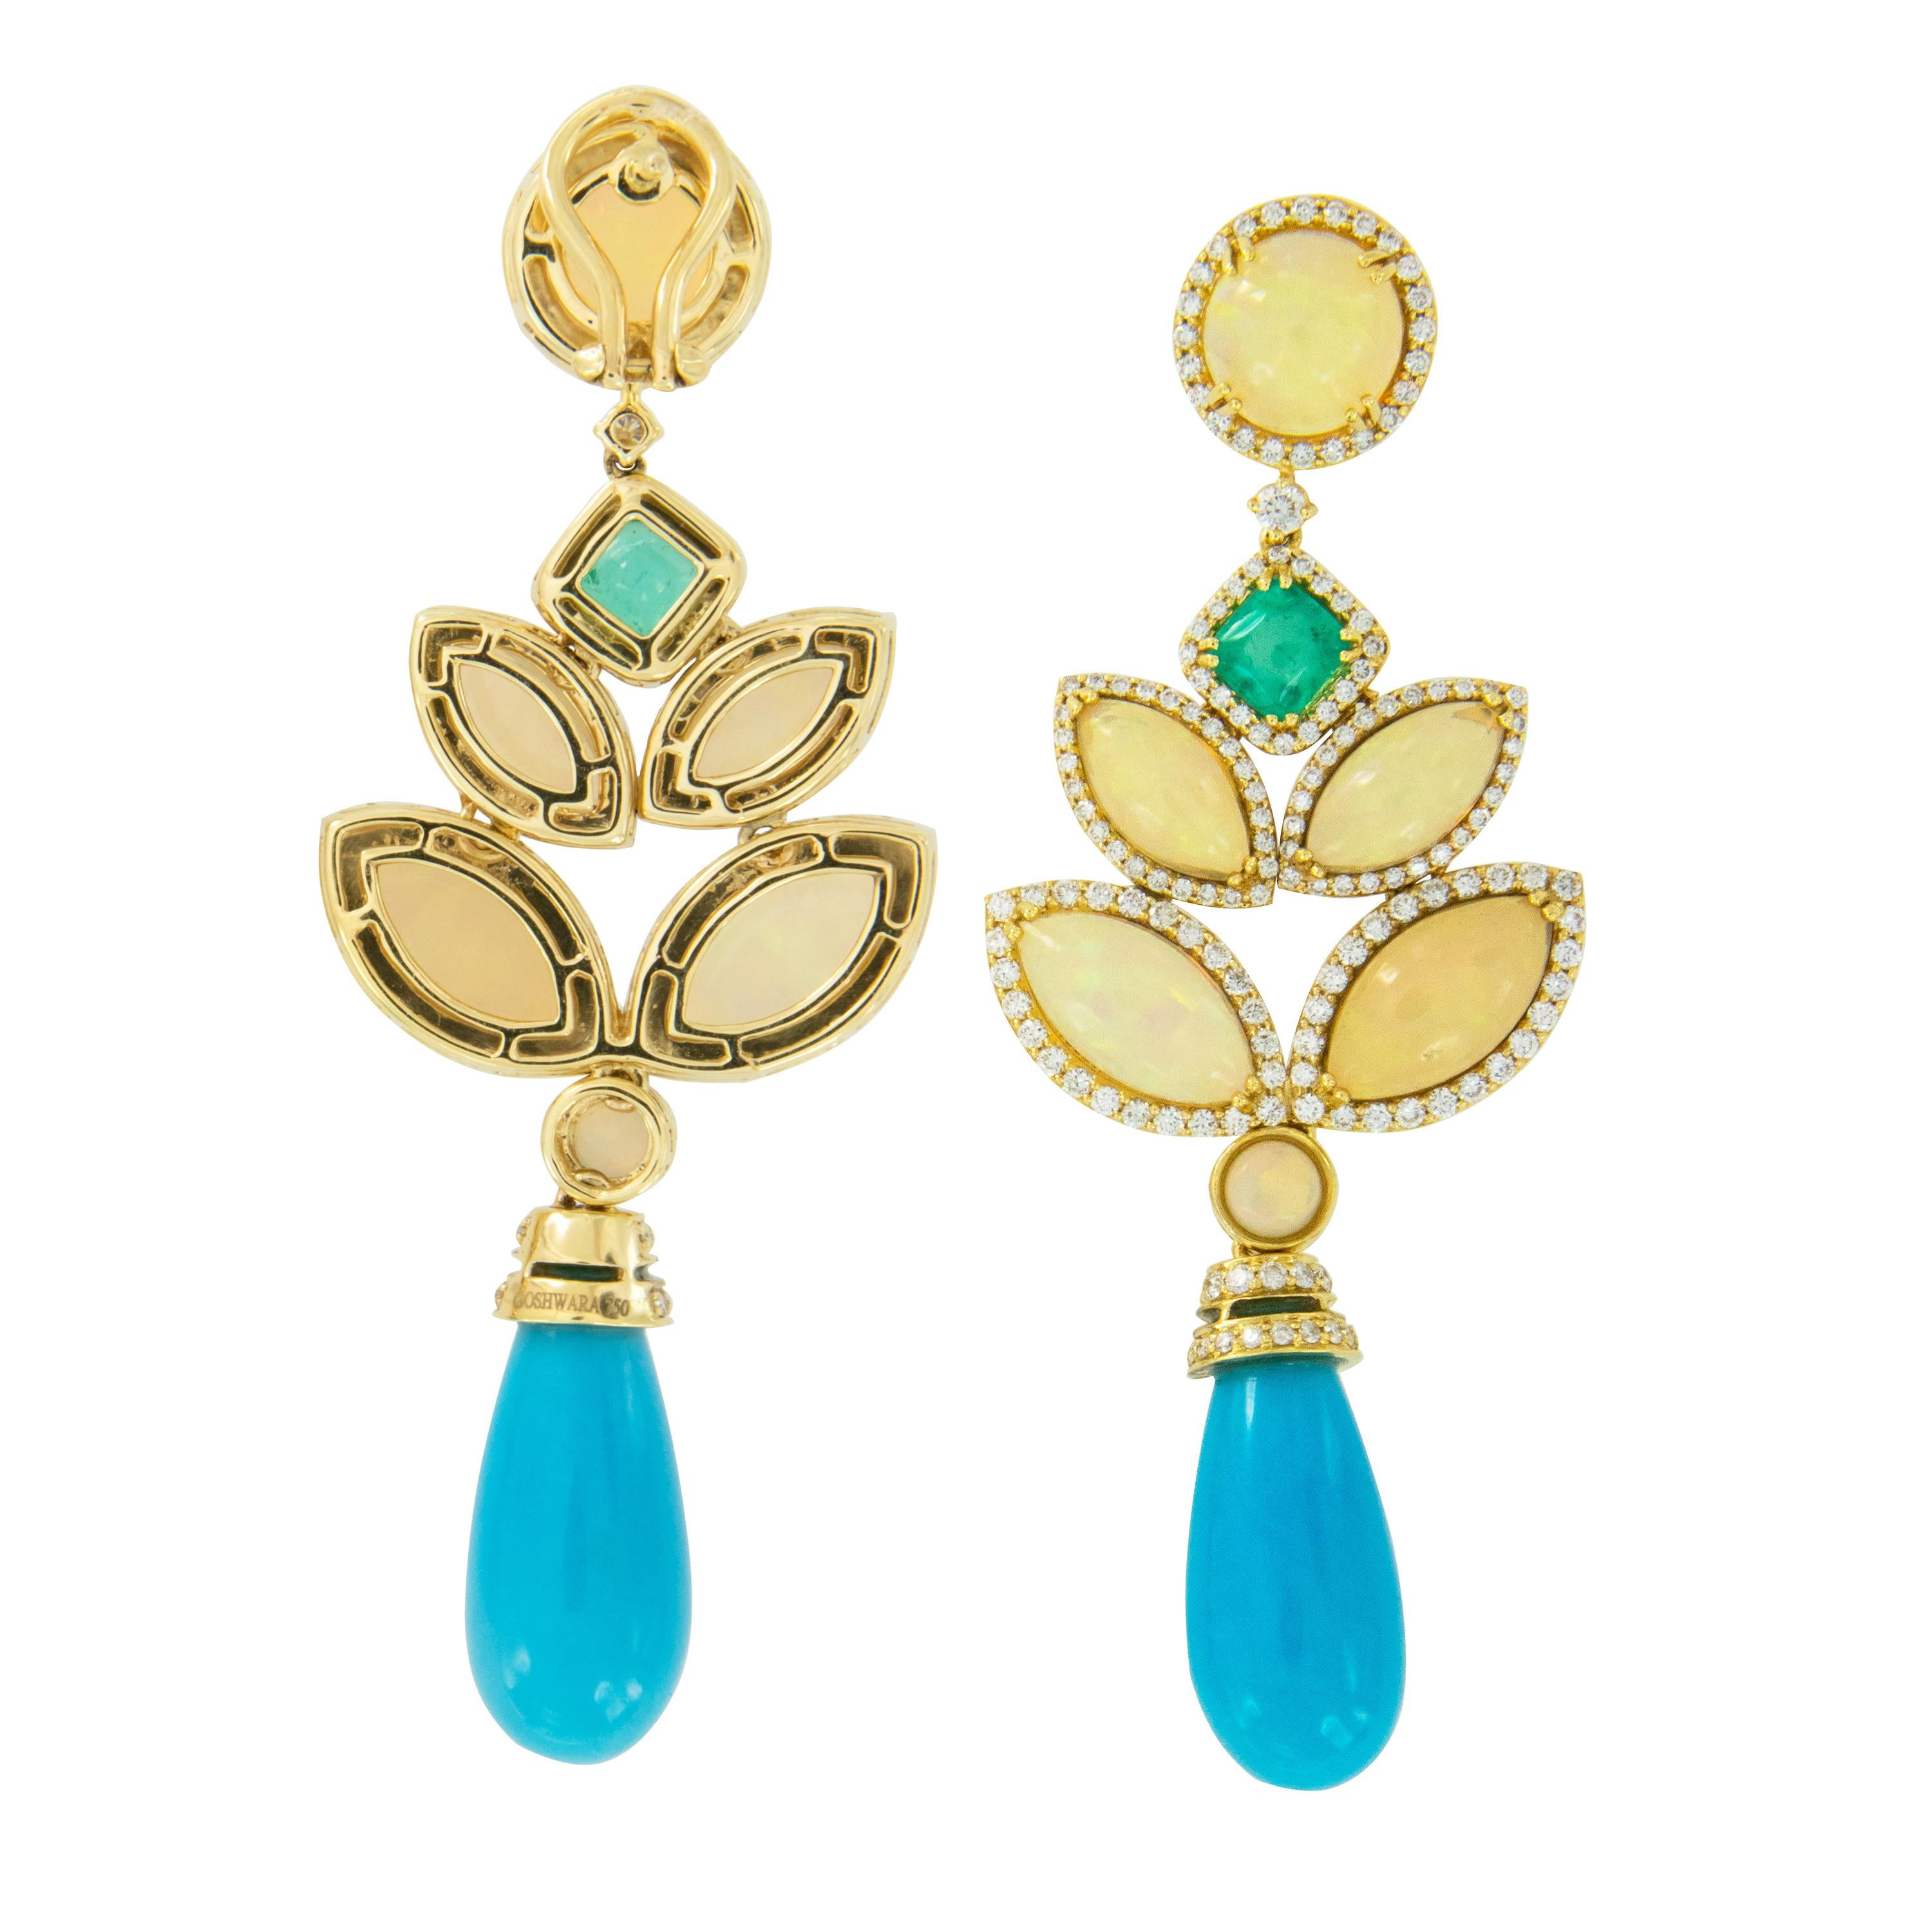 From Goshwara's G- One collection - made up of exclusive pieces composed of the rarest of gemstones and Goshwara's exceptional craftsmanship! These elegantly tiered drop earrings are stunning with cabochon cut fine opals & emeralds all perfectly